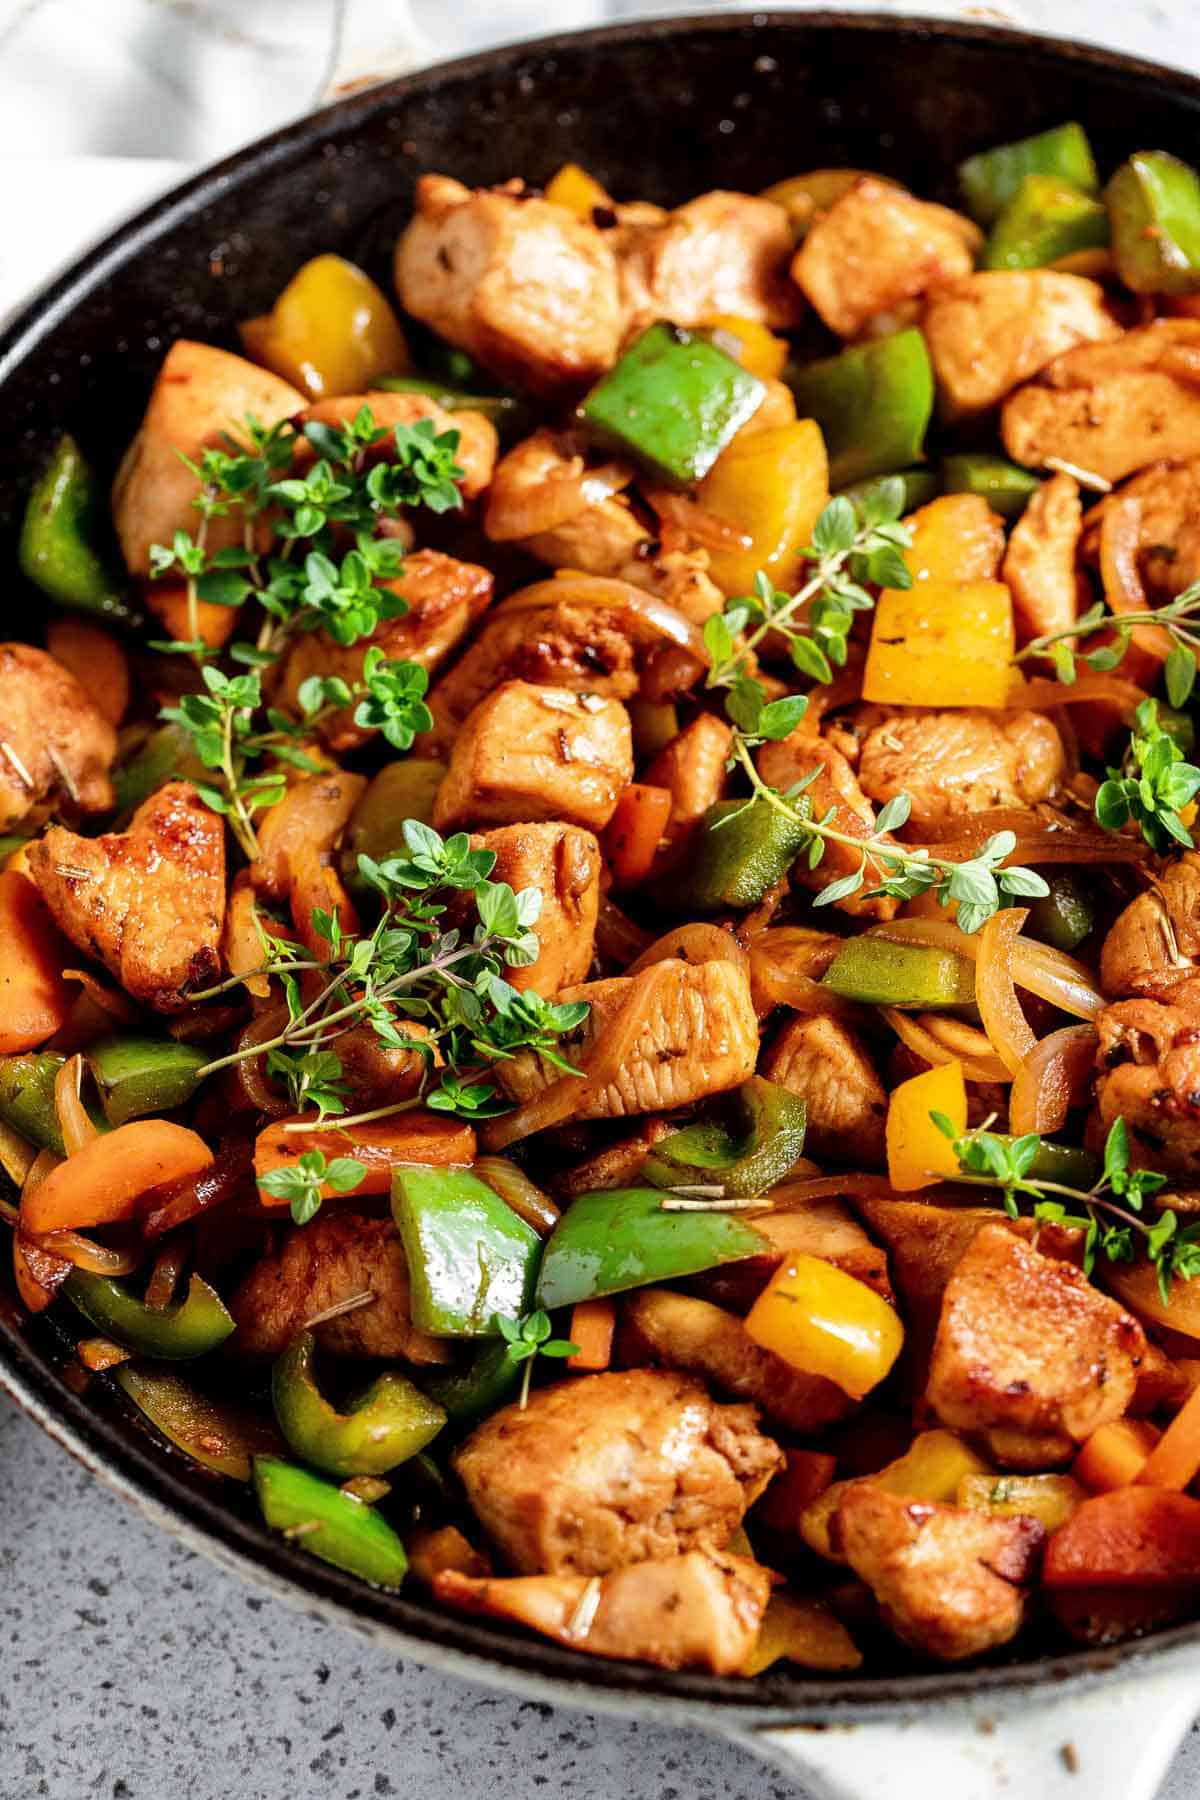 Chicken stir fry in a skillet with peppers and herbs.